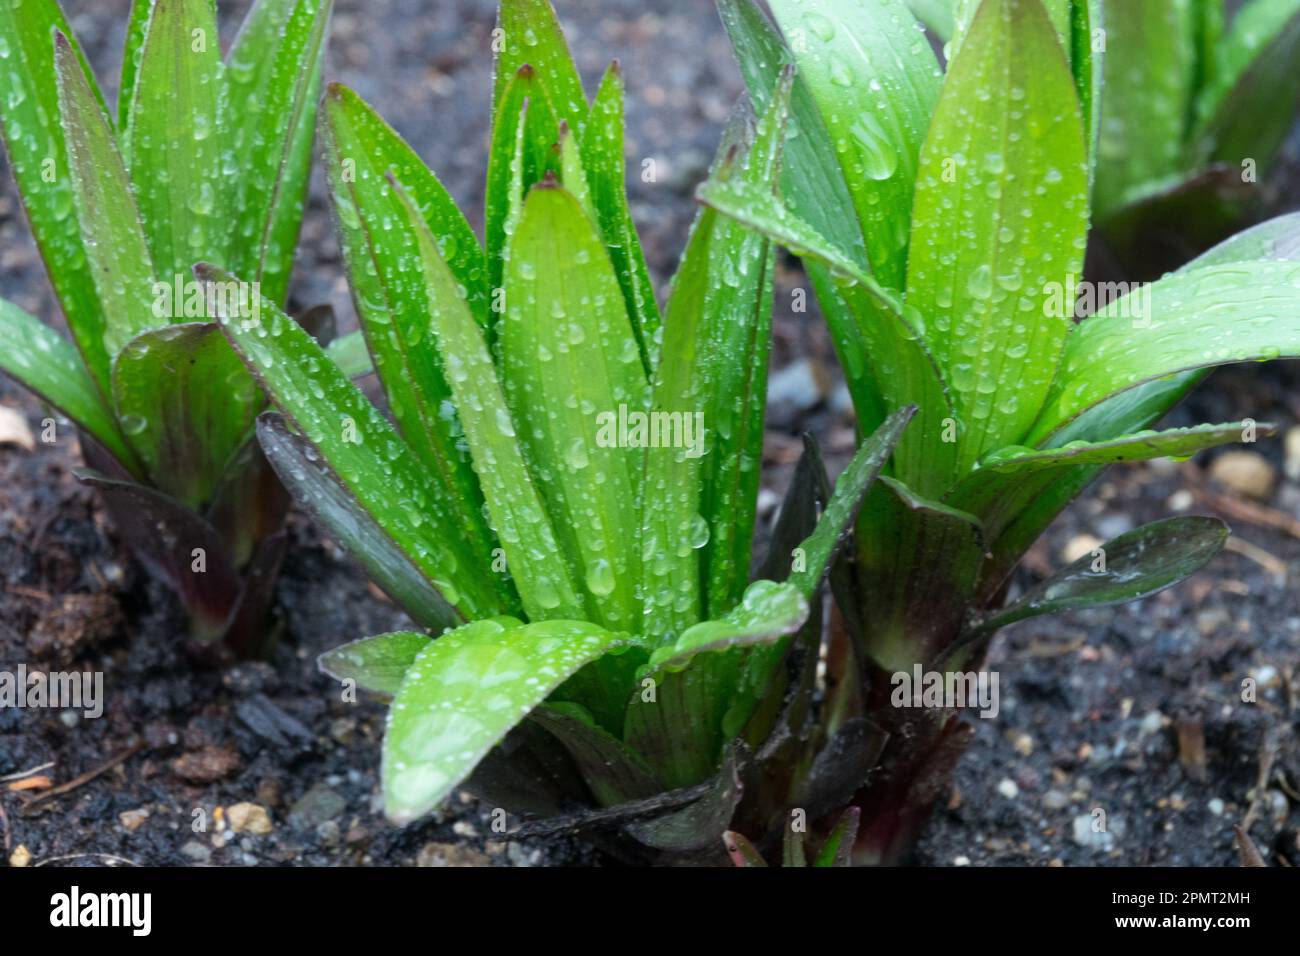 Lily, Shoots, Lilium Plants, Spring, Sprouting, Ground, Emerging, Plant water droplets leaves Stock Photo